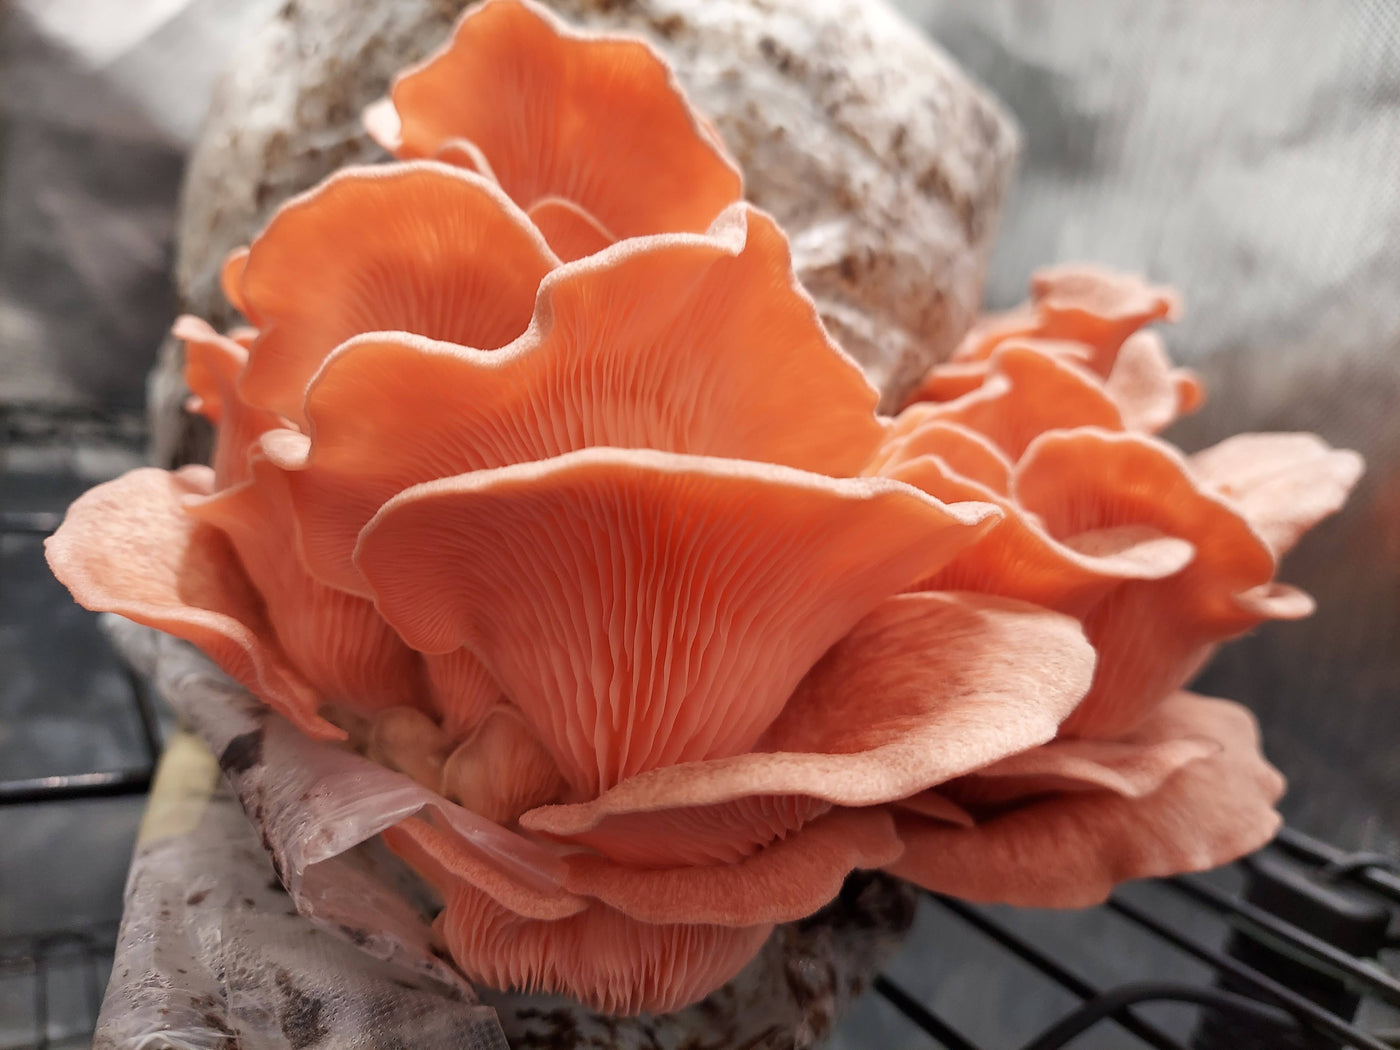 Fresh Gourmet Mushrooms **LOCAL PICKUP/DELIVERY ONLY** - The CAPN's Mushroom Company